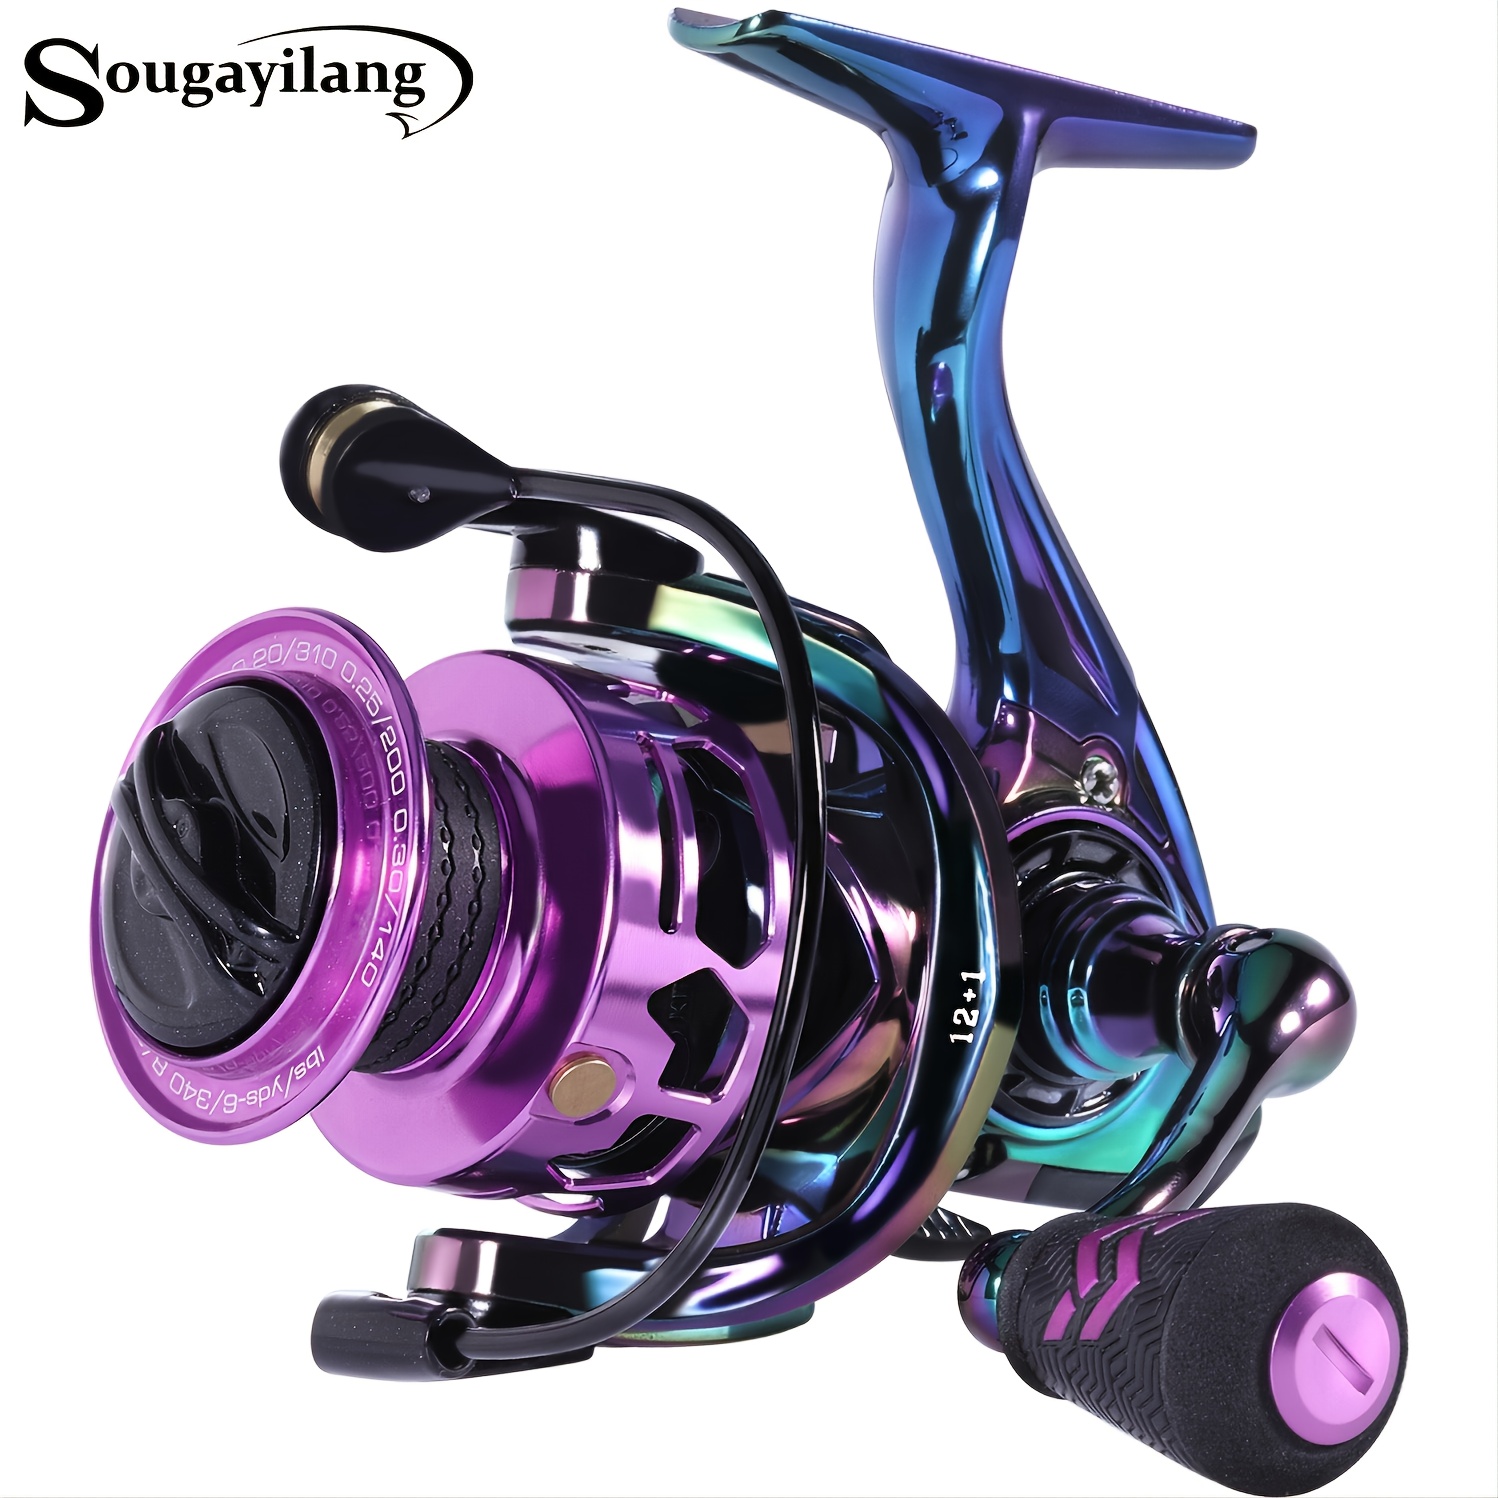 Sougayilang Spinning Reel 1000-3000 Series 12BB Fluorescent Yellow And Red  Fishing Coil, Fishing Tackle